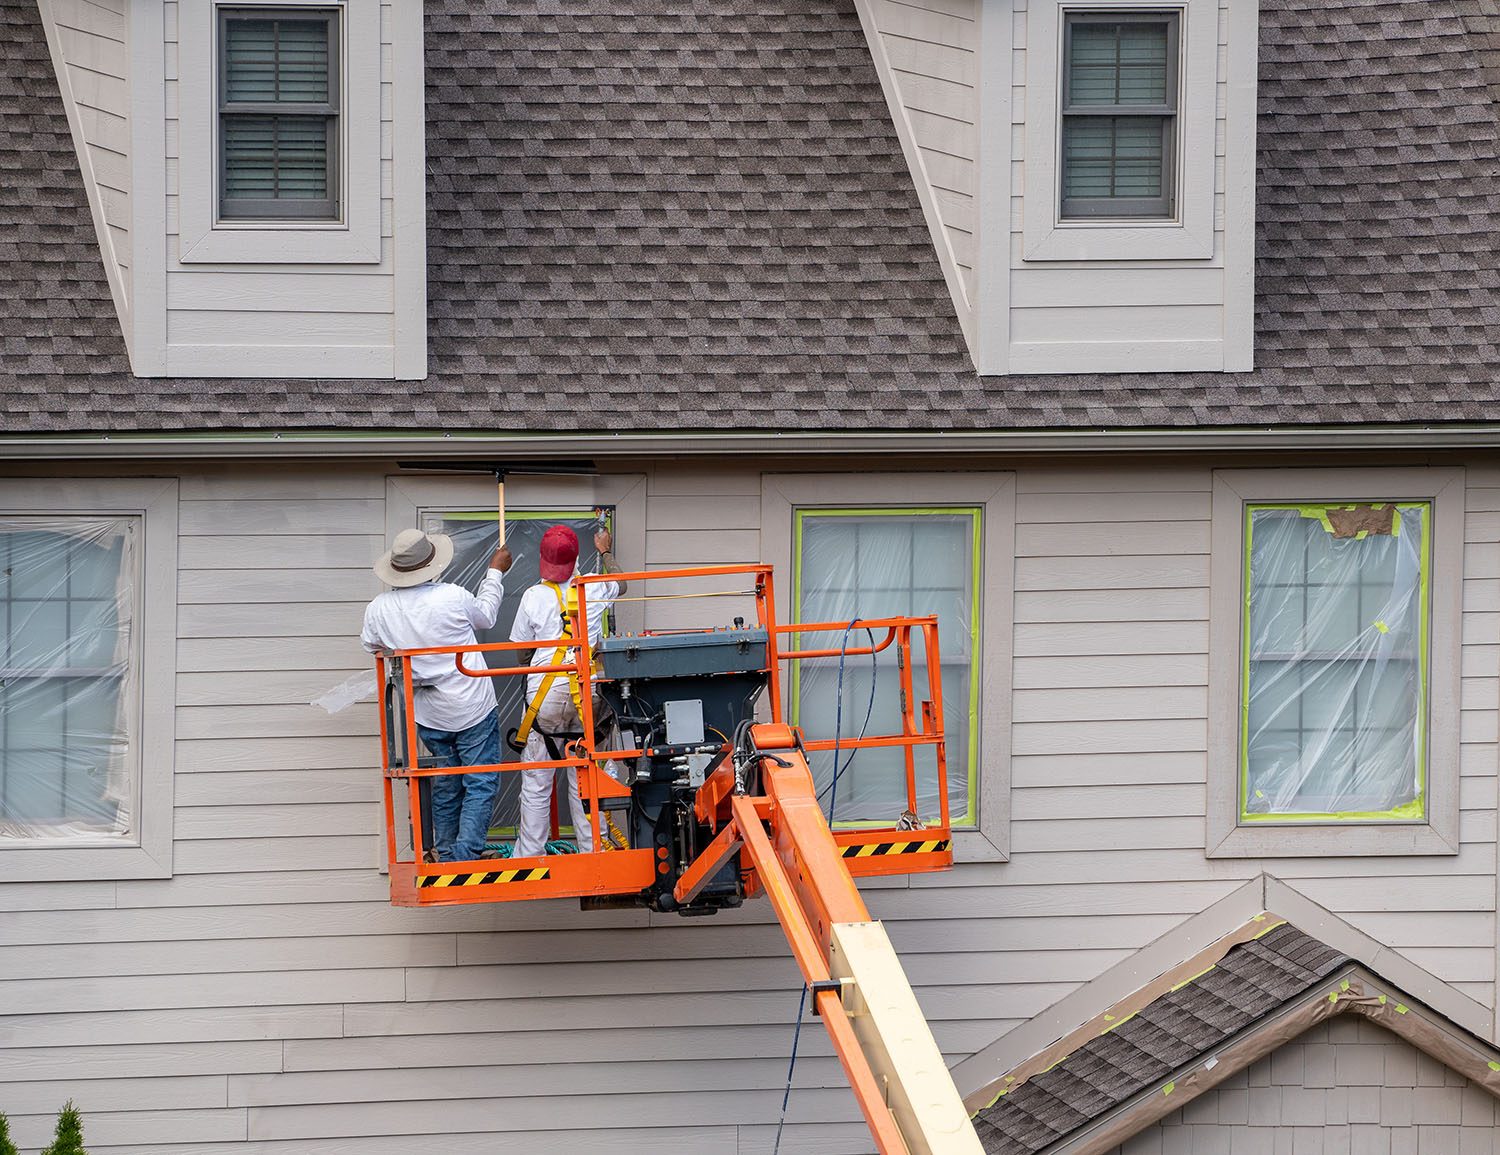 Two painting contractors on an orange bucket lift painting the second story window of a traditional home in a tan color in Charlotte, NC